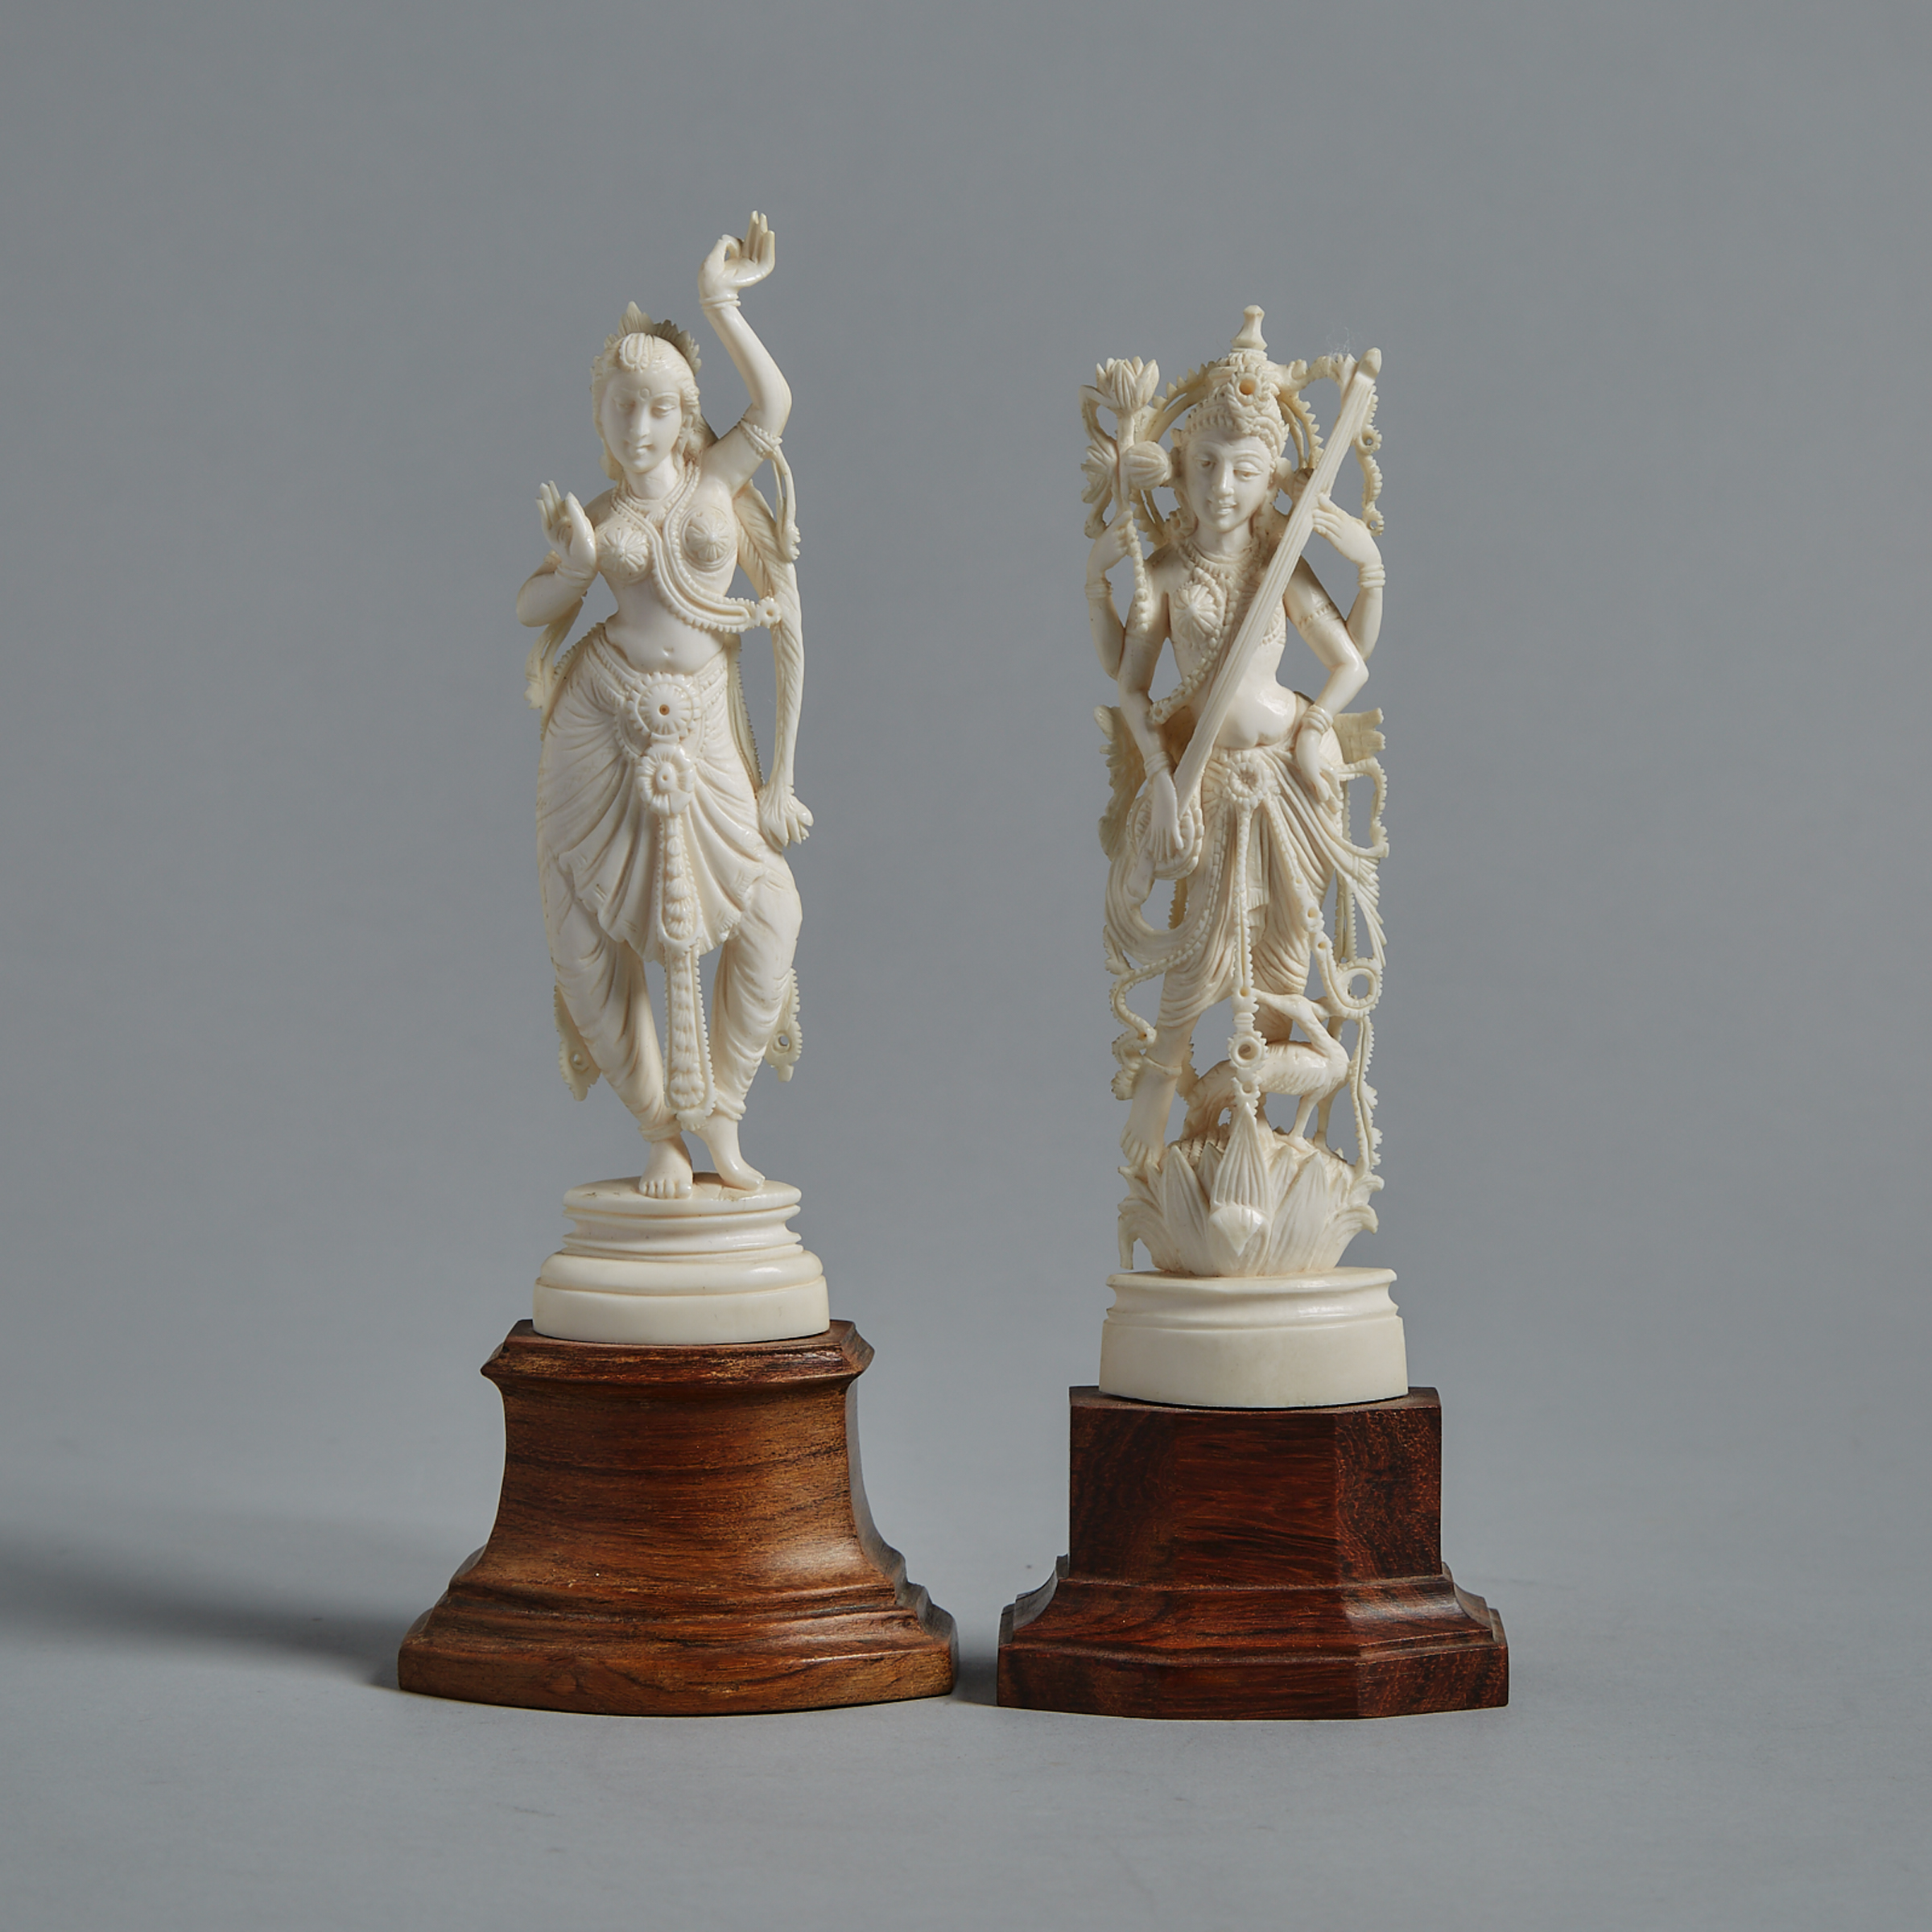 Two Indian Ivory Carved Figures